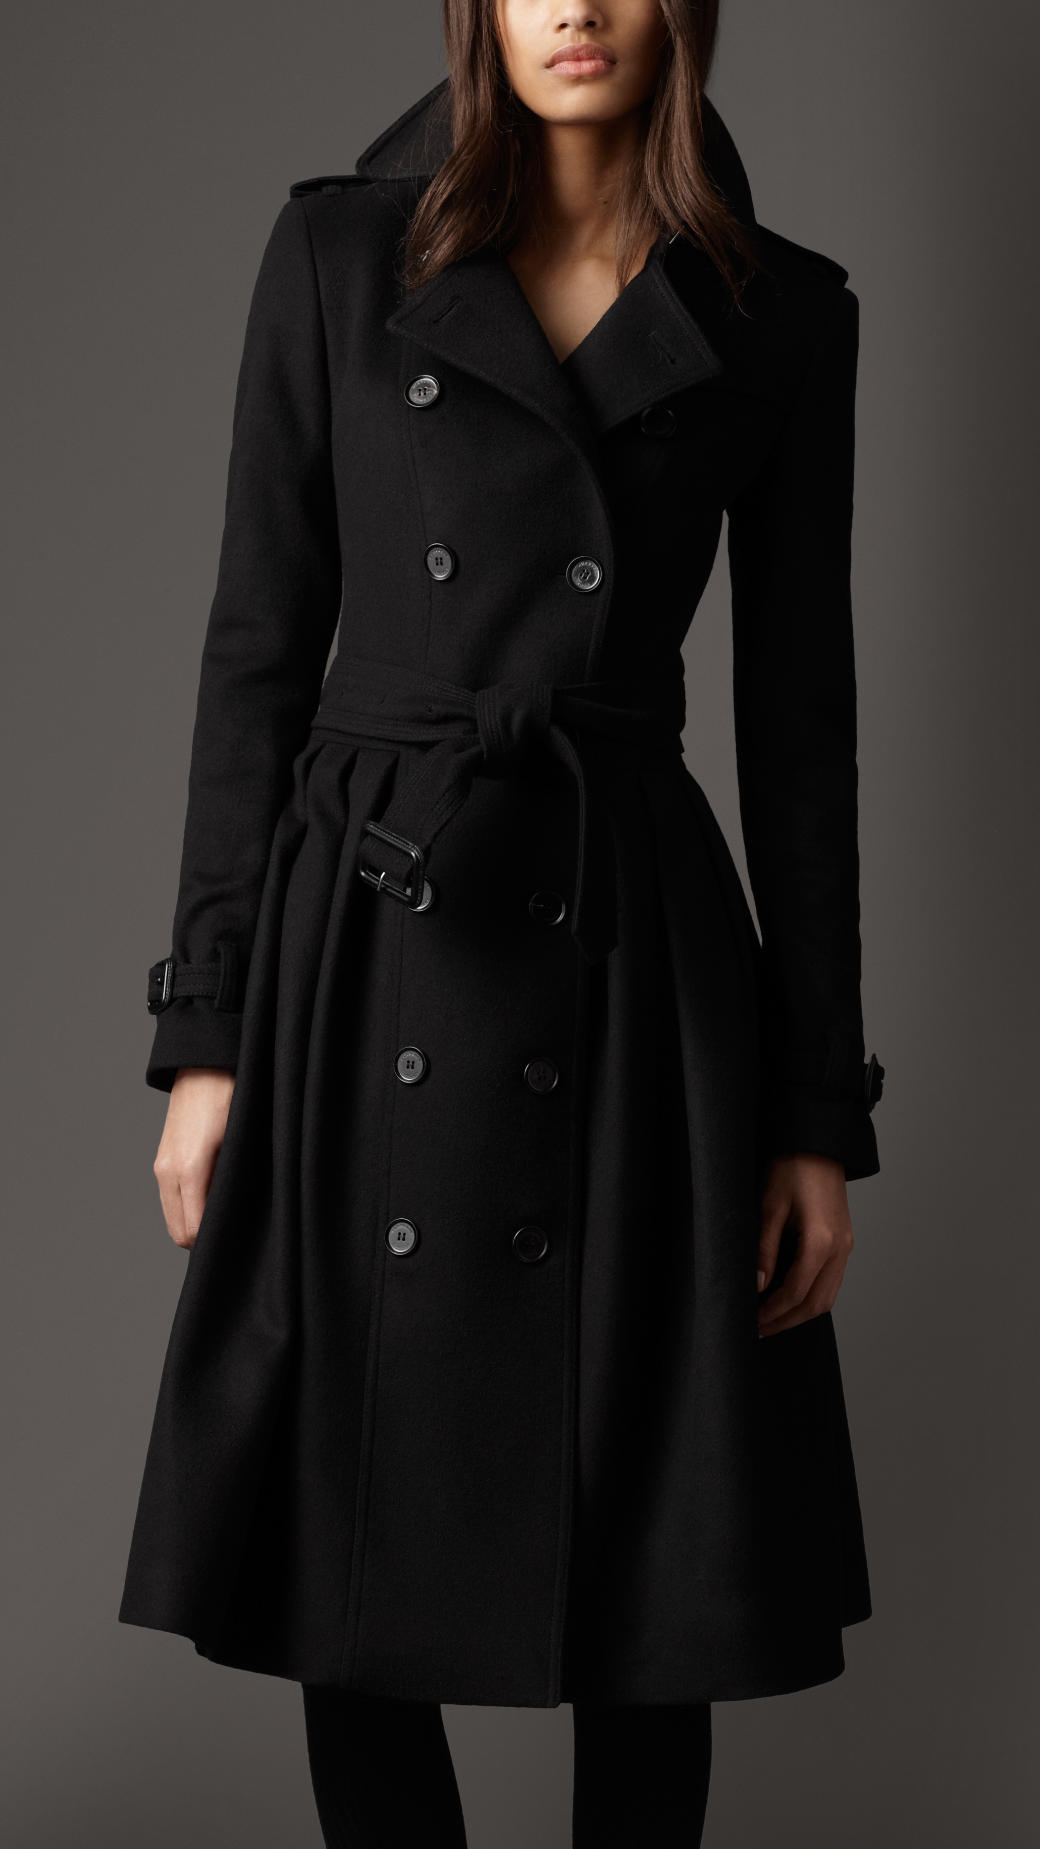 Virgin Wool and Cashmere Coat in Black 